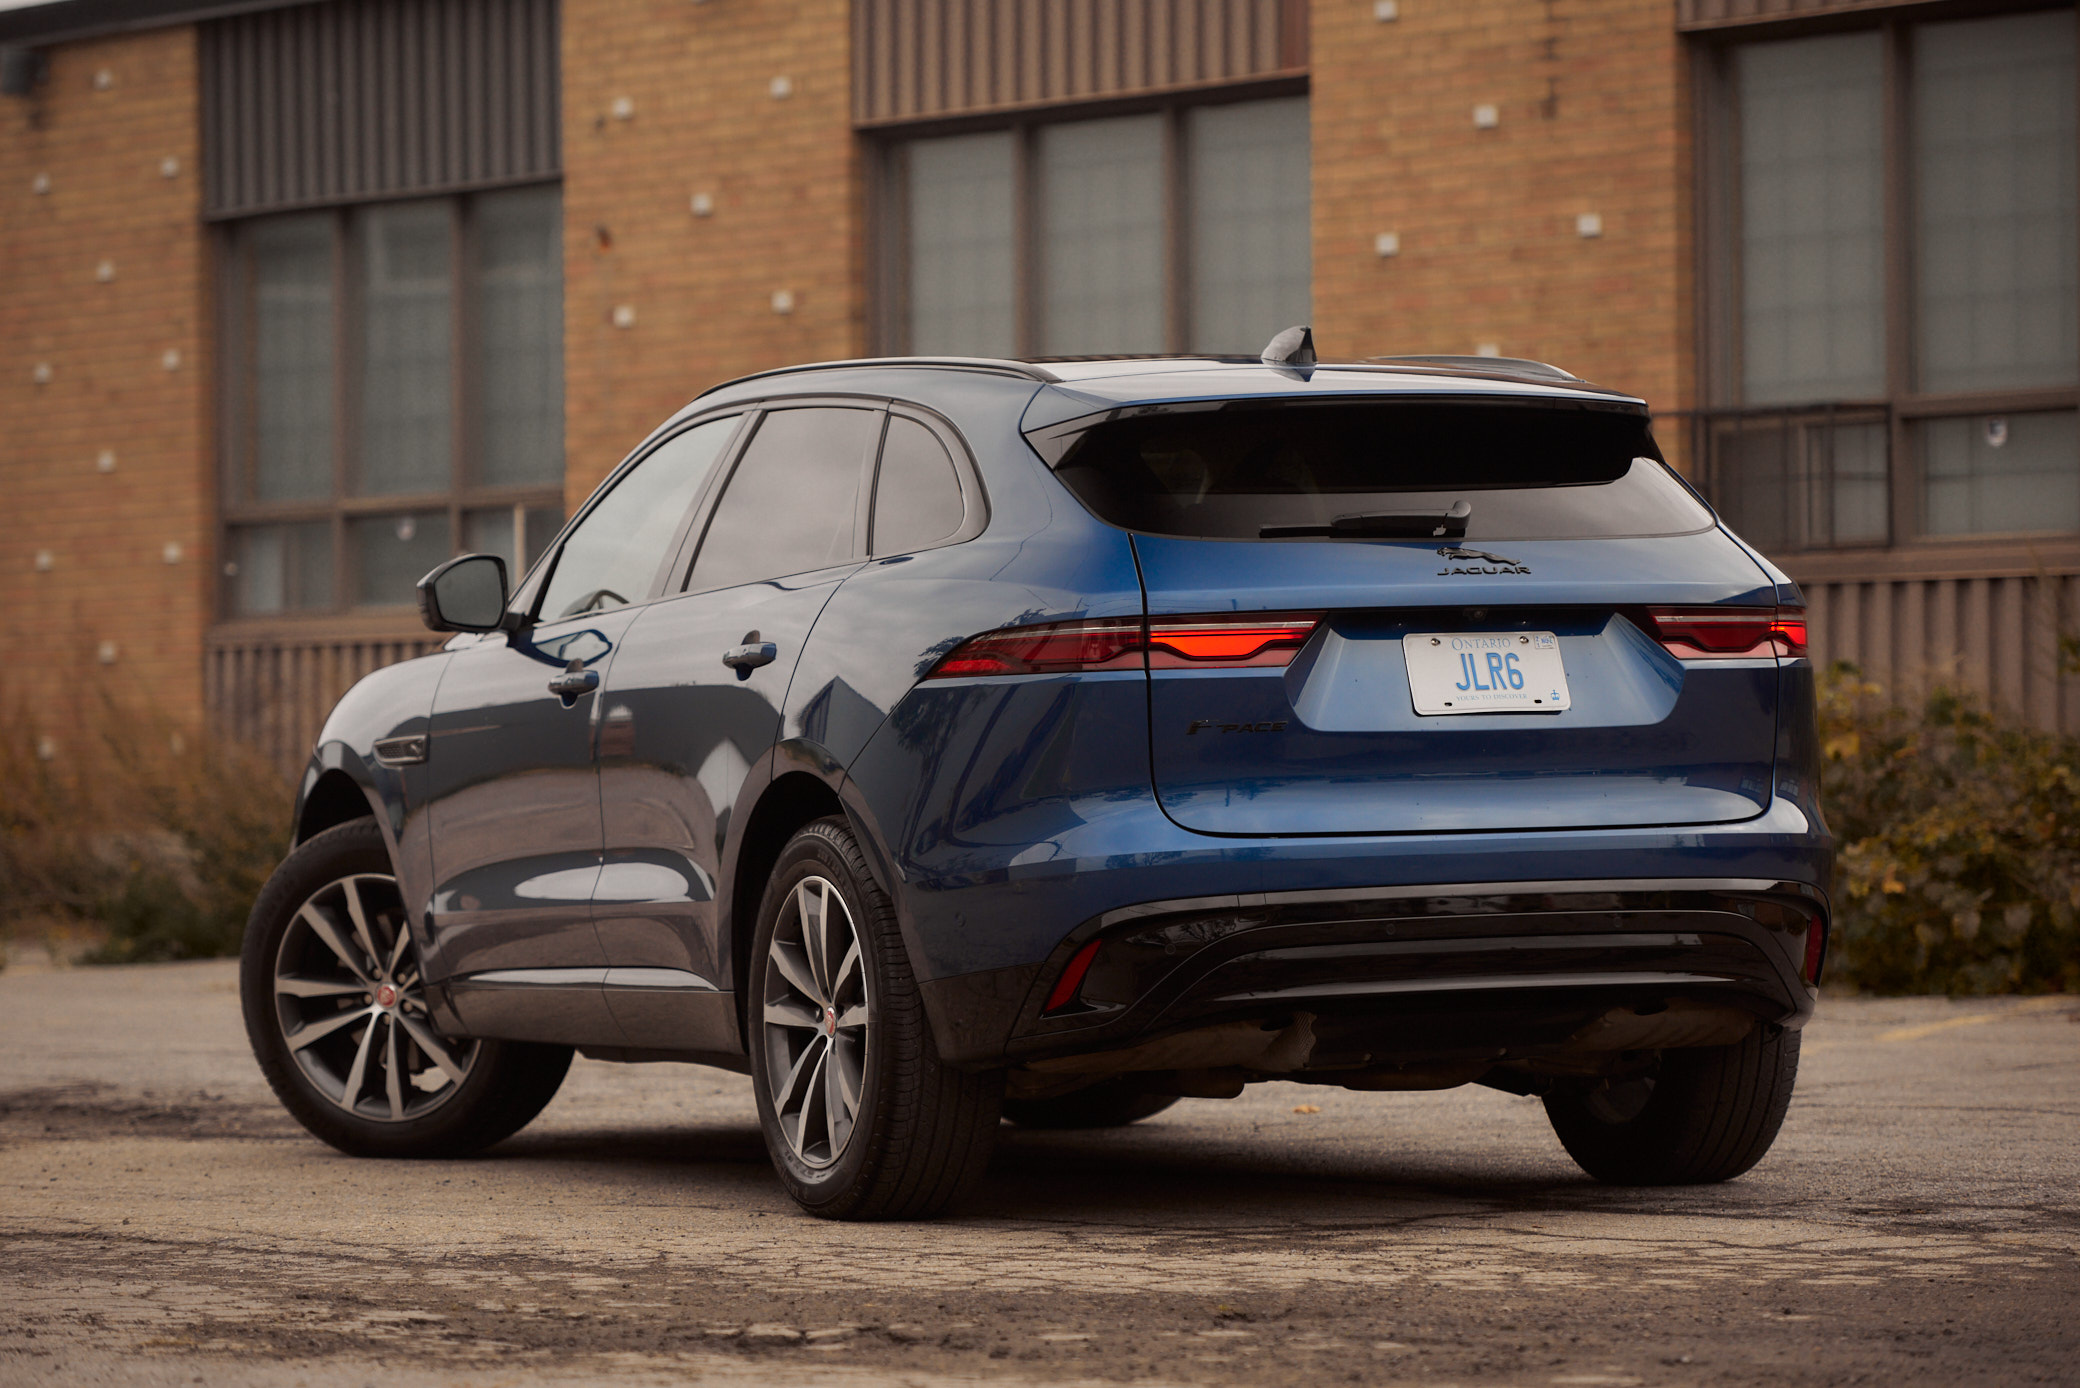 2022 Jaguar F-Pace Survives Due To Good Looks And Driver Engagement